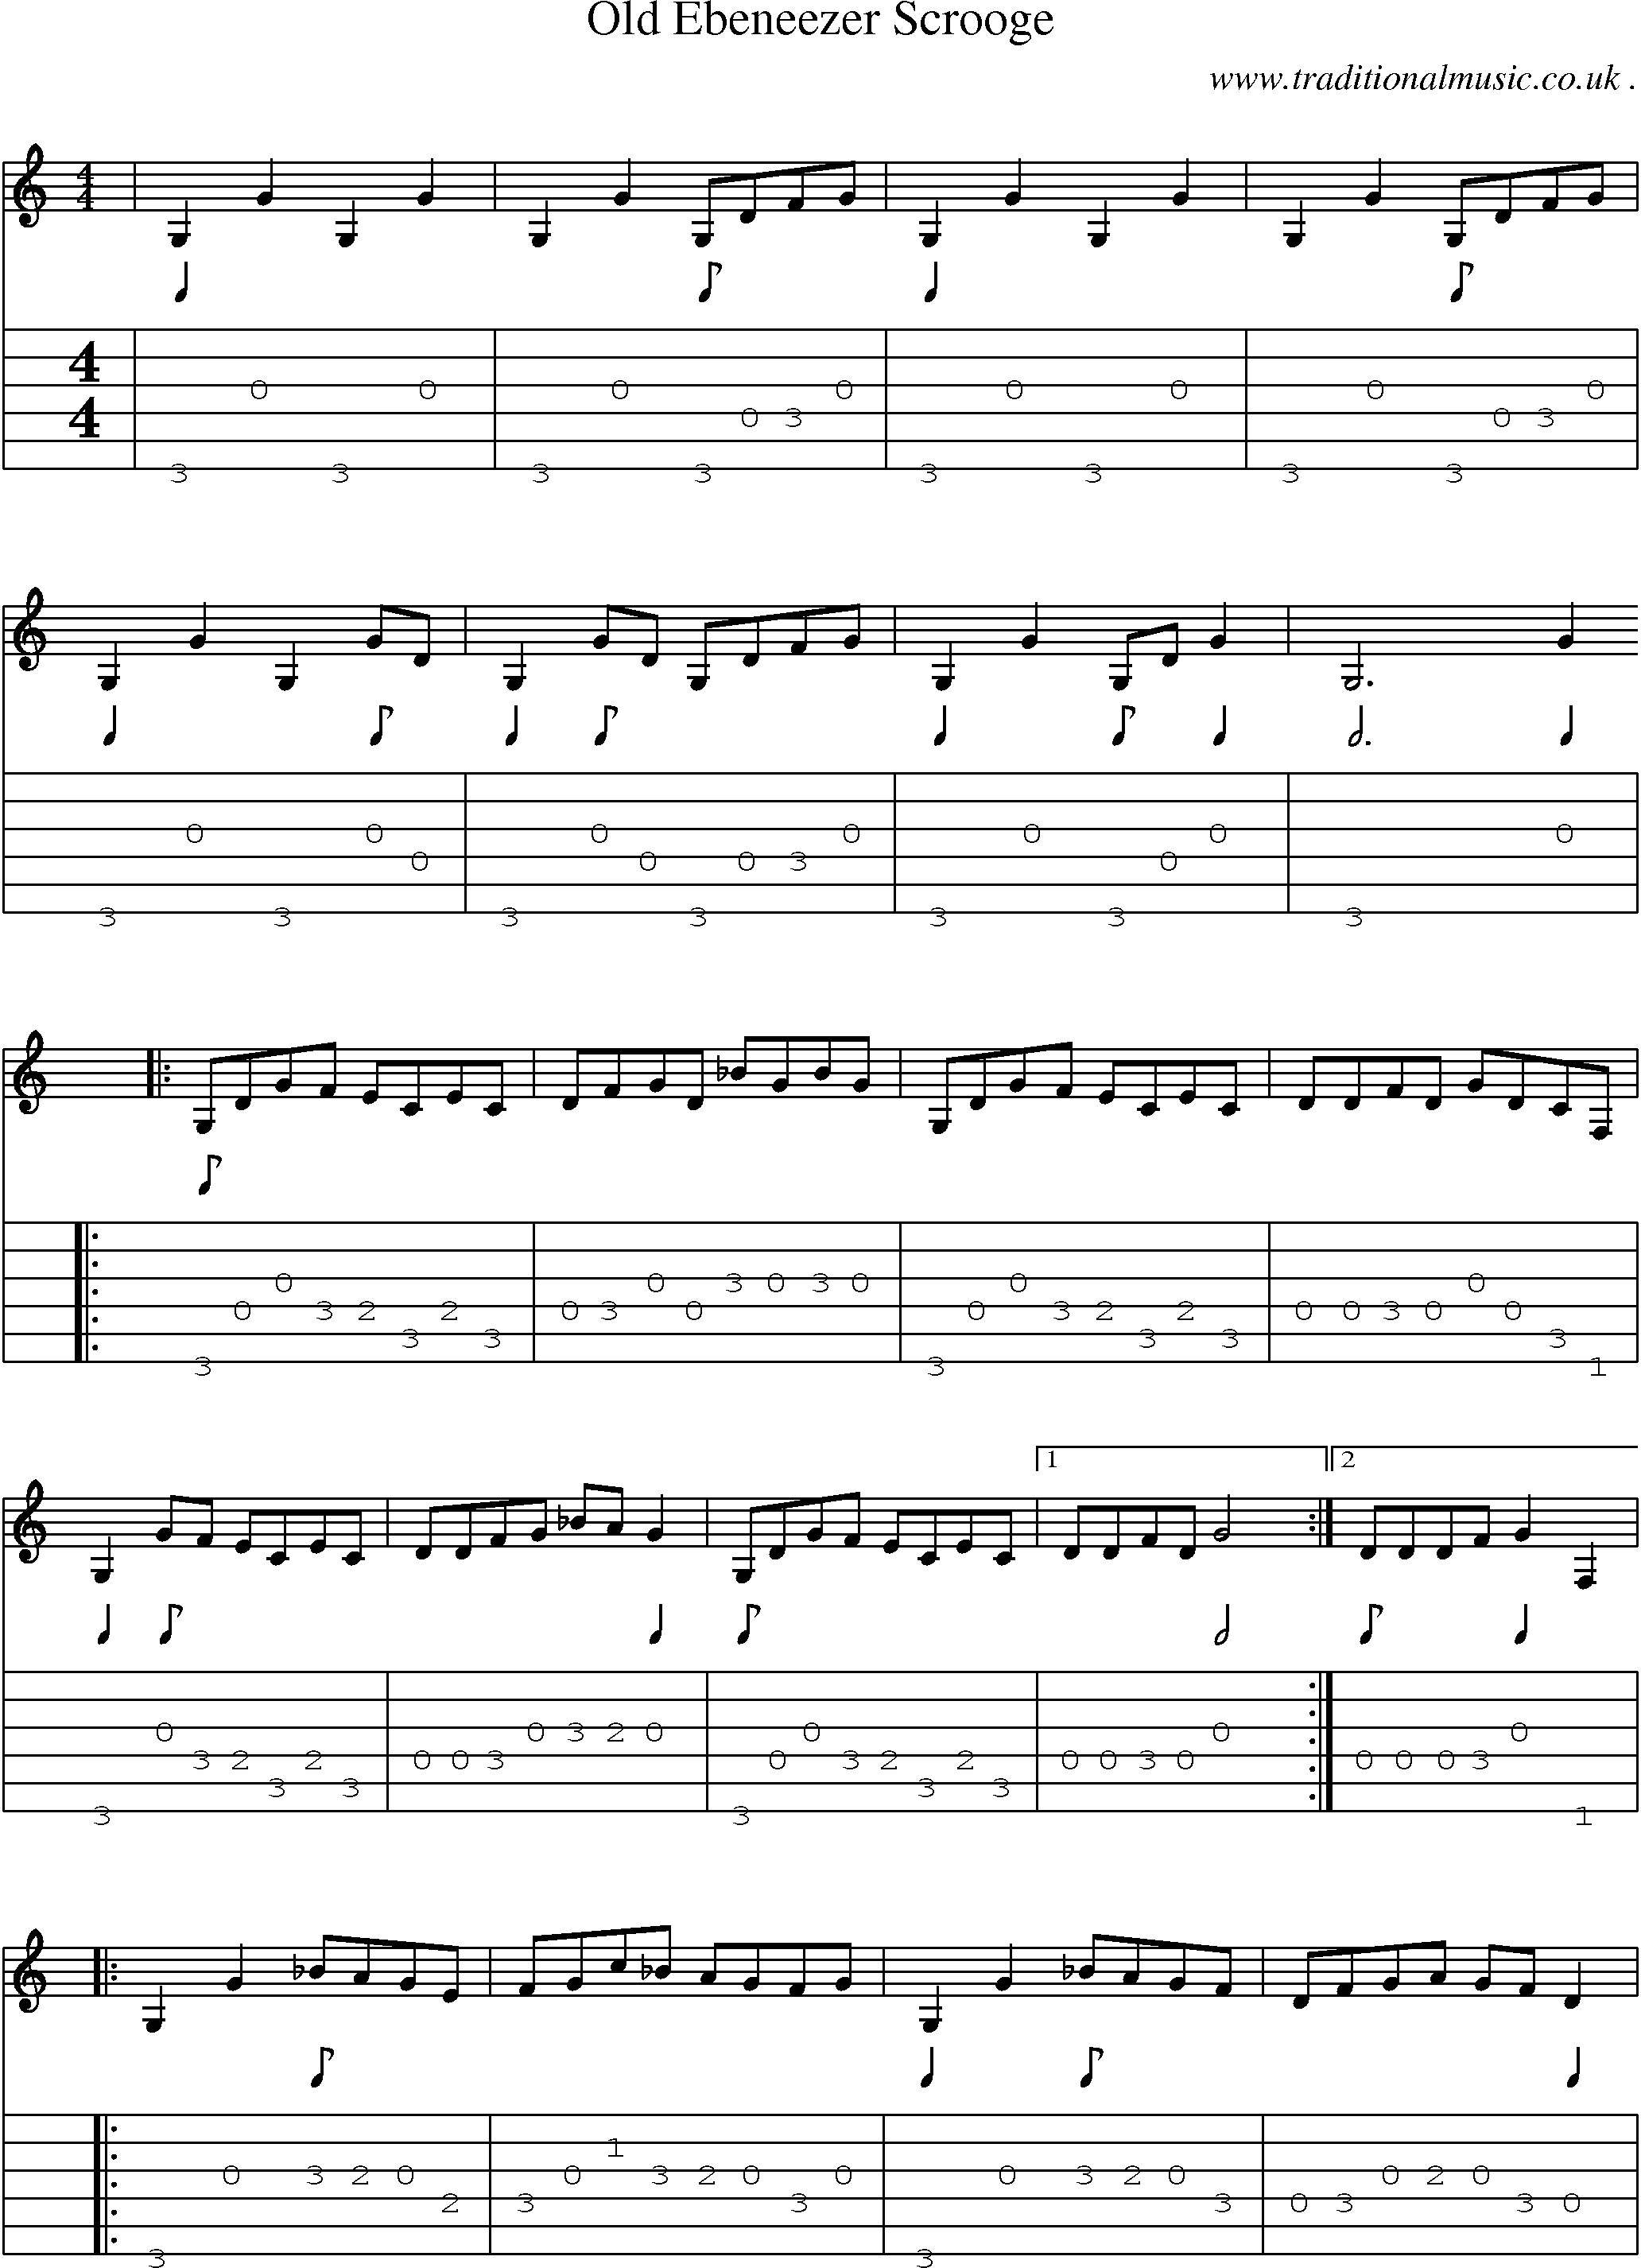 Music Score and Guitar Tabs for Old Ebeneezer Scrooge